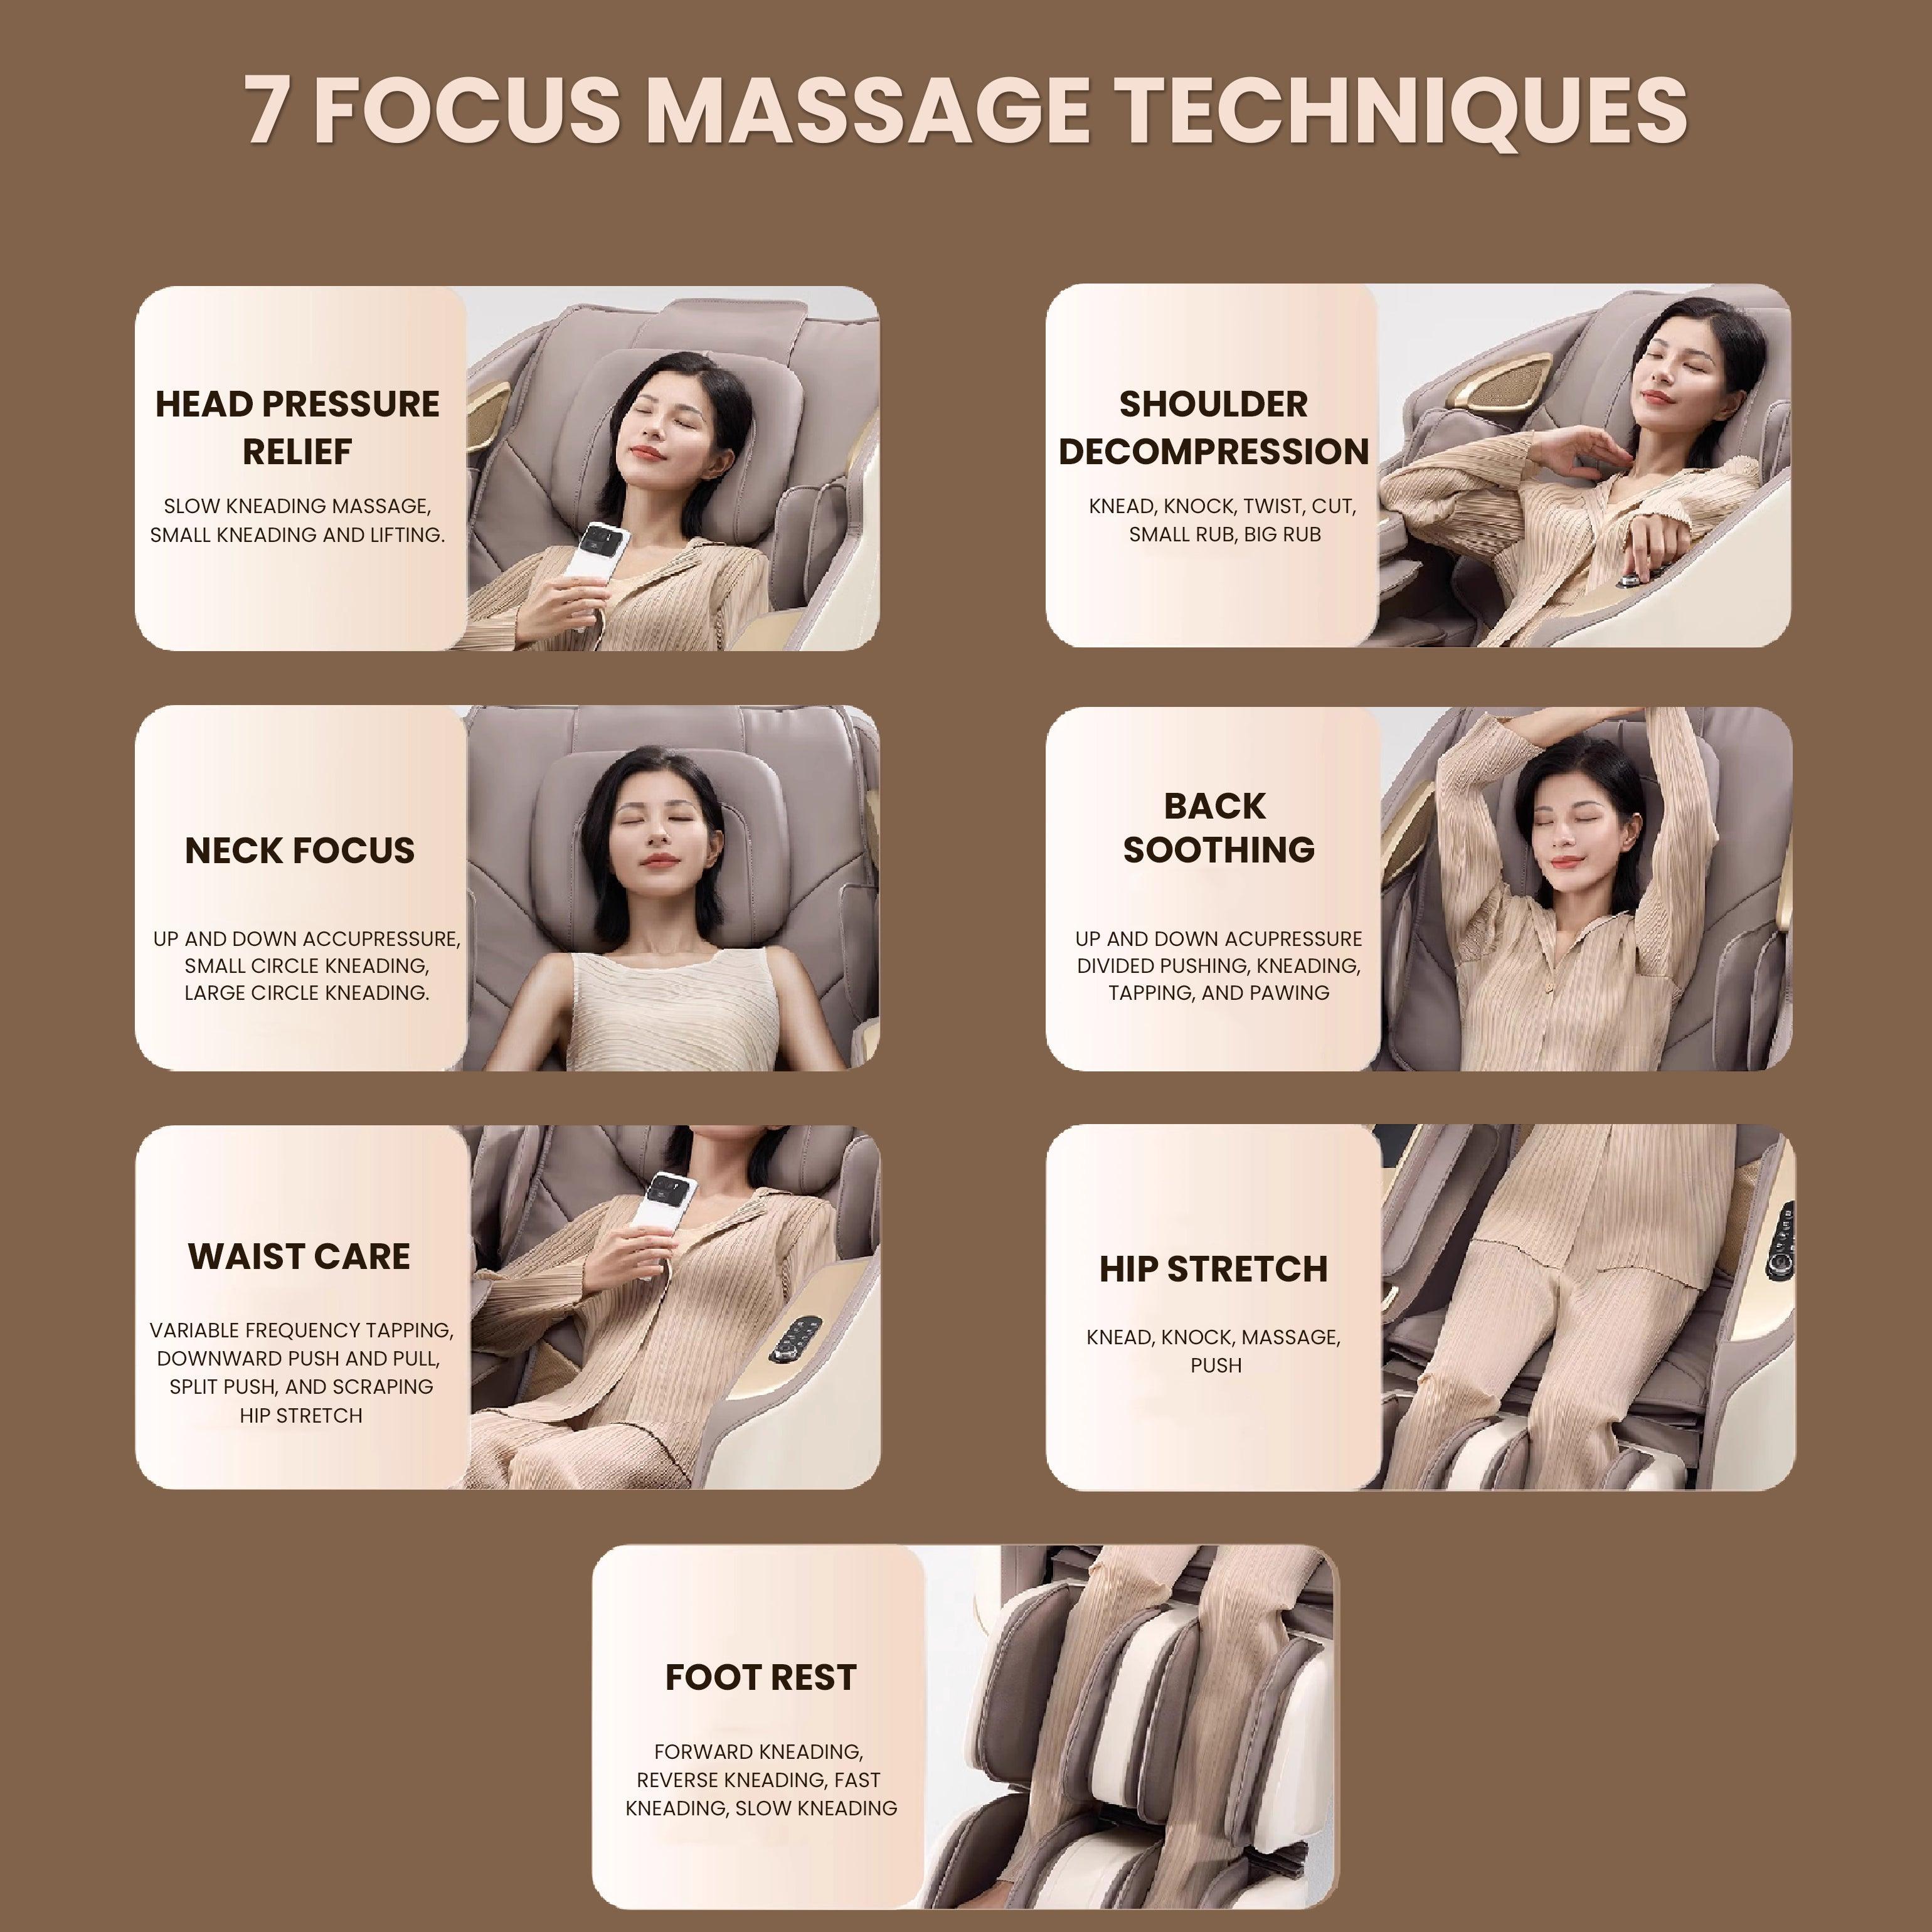 Brown massage chair demonstrating 7 focus massage techniques including head pressure relief, shoulder decompression, neck focus, and more.